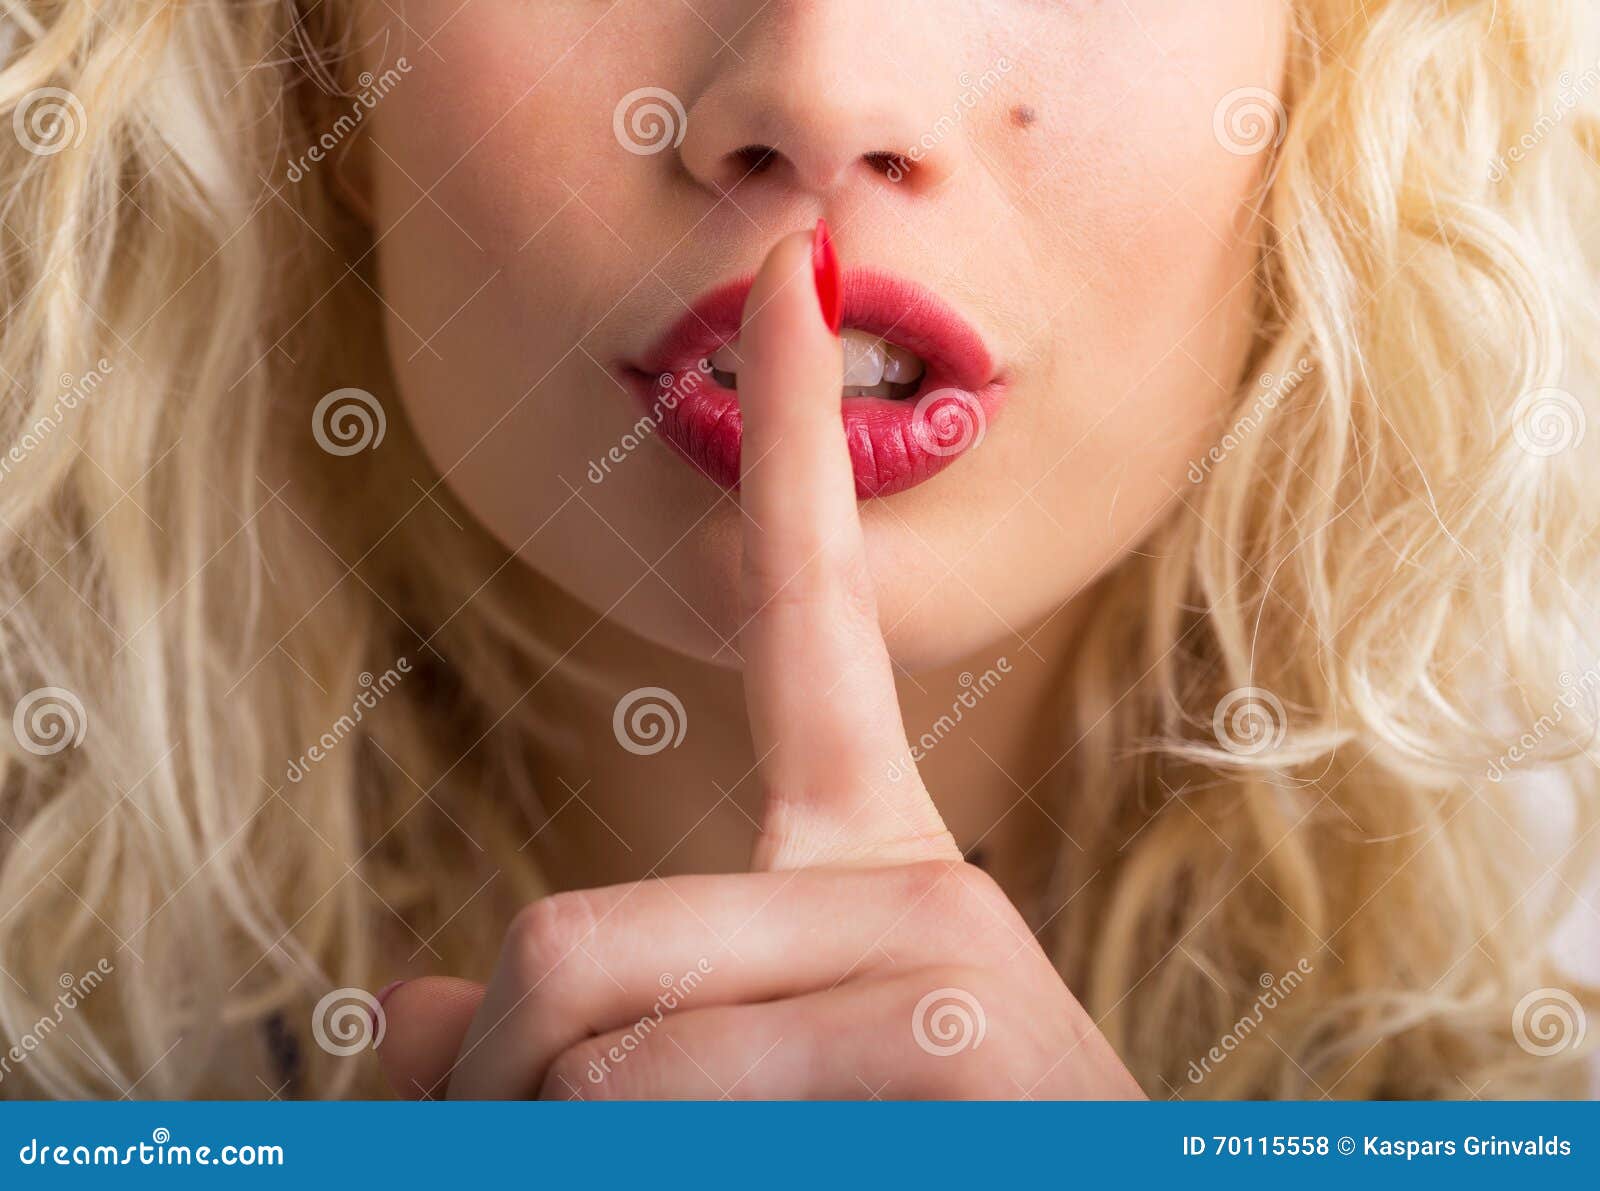 woman showing shh sign